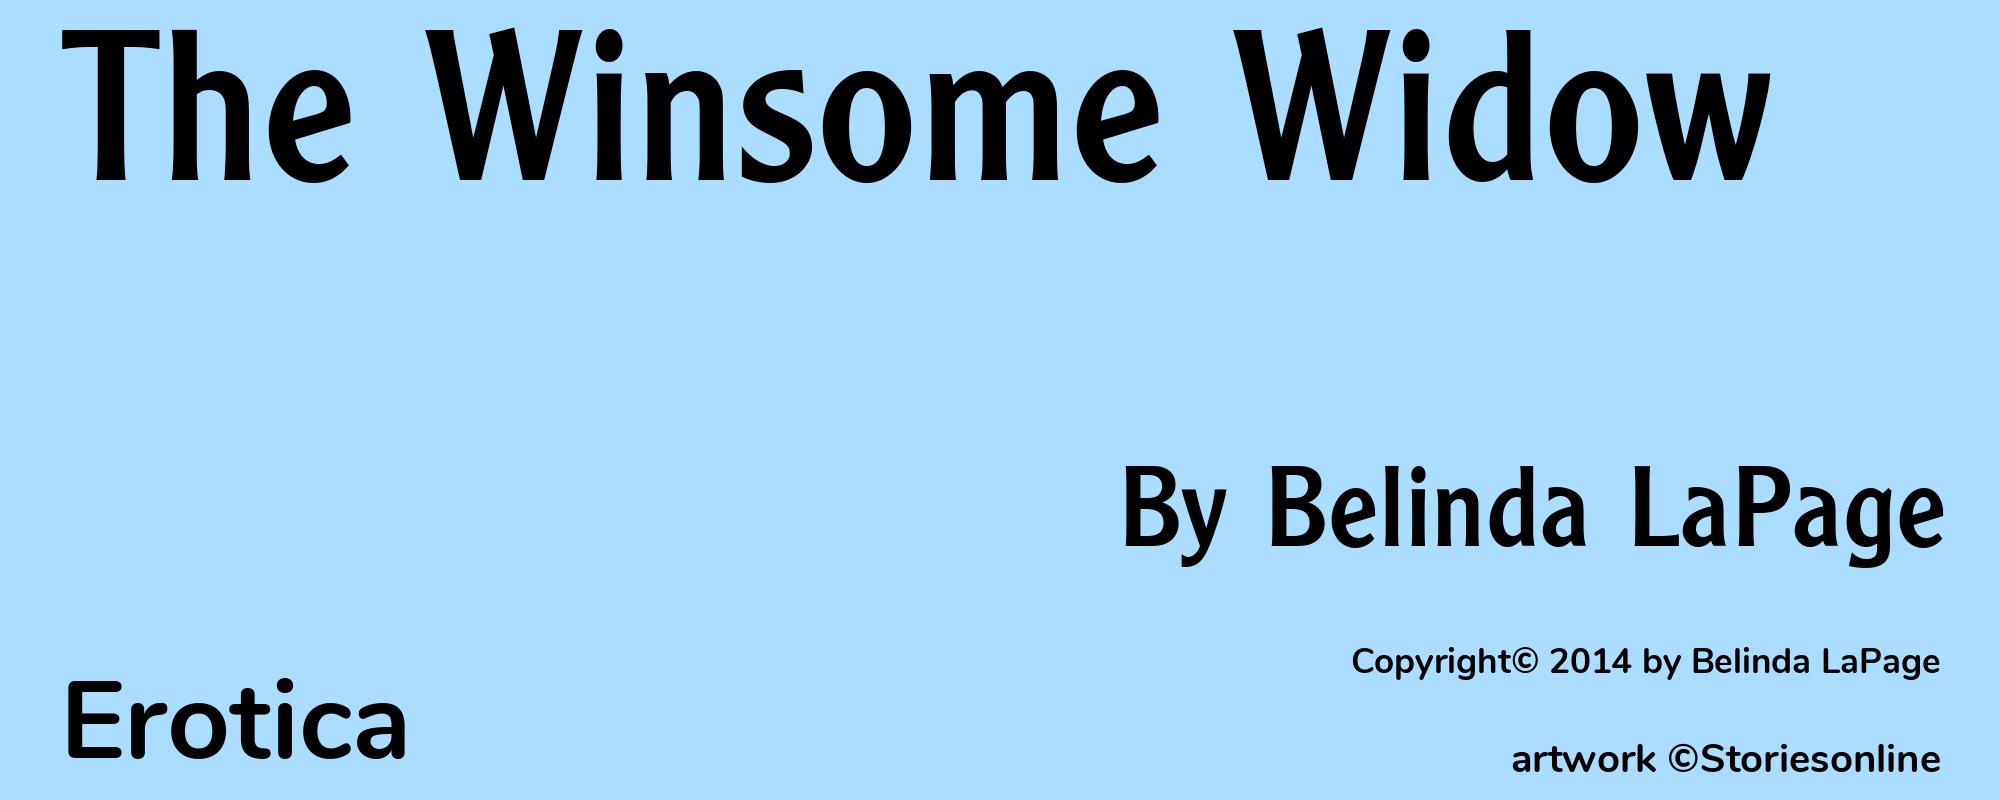 The Winsome Widow - Cover